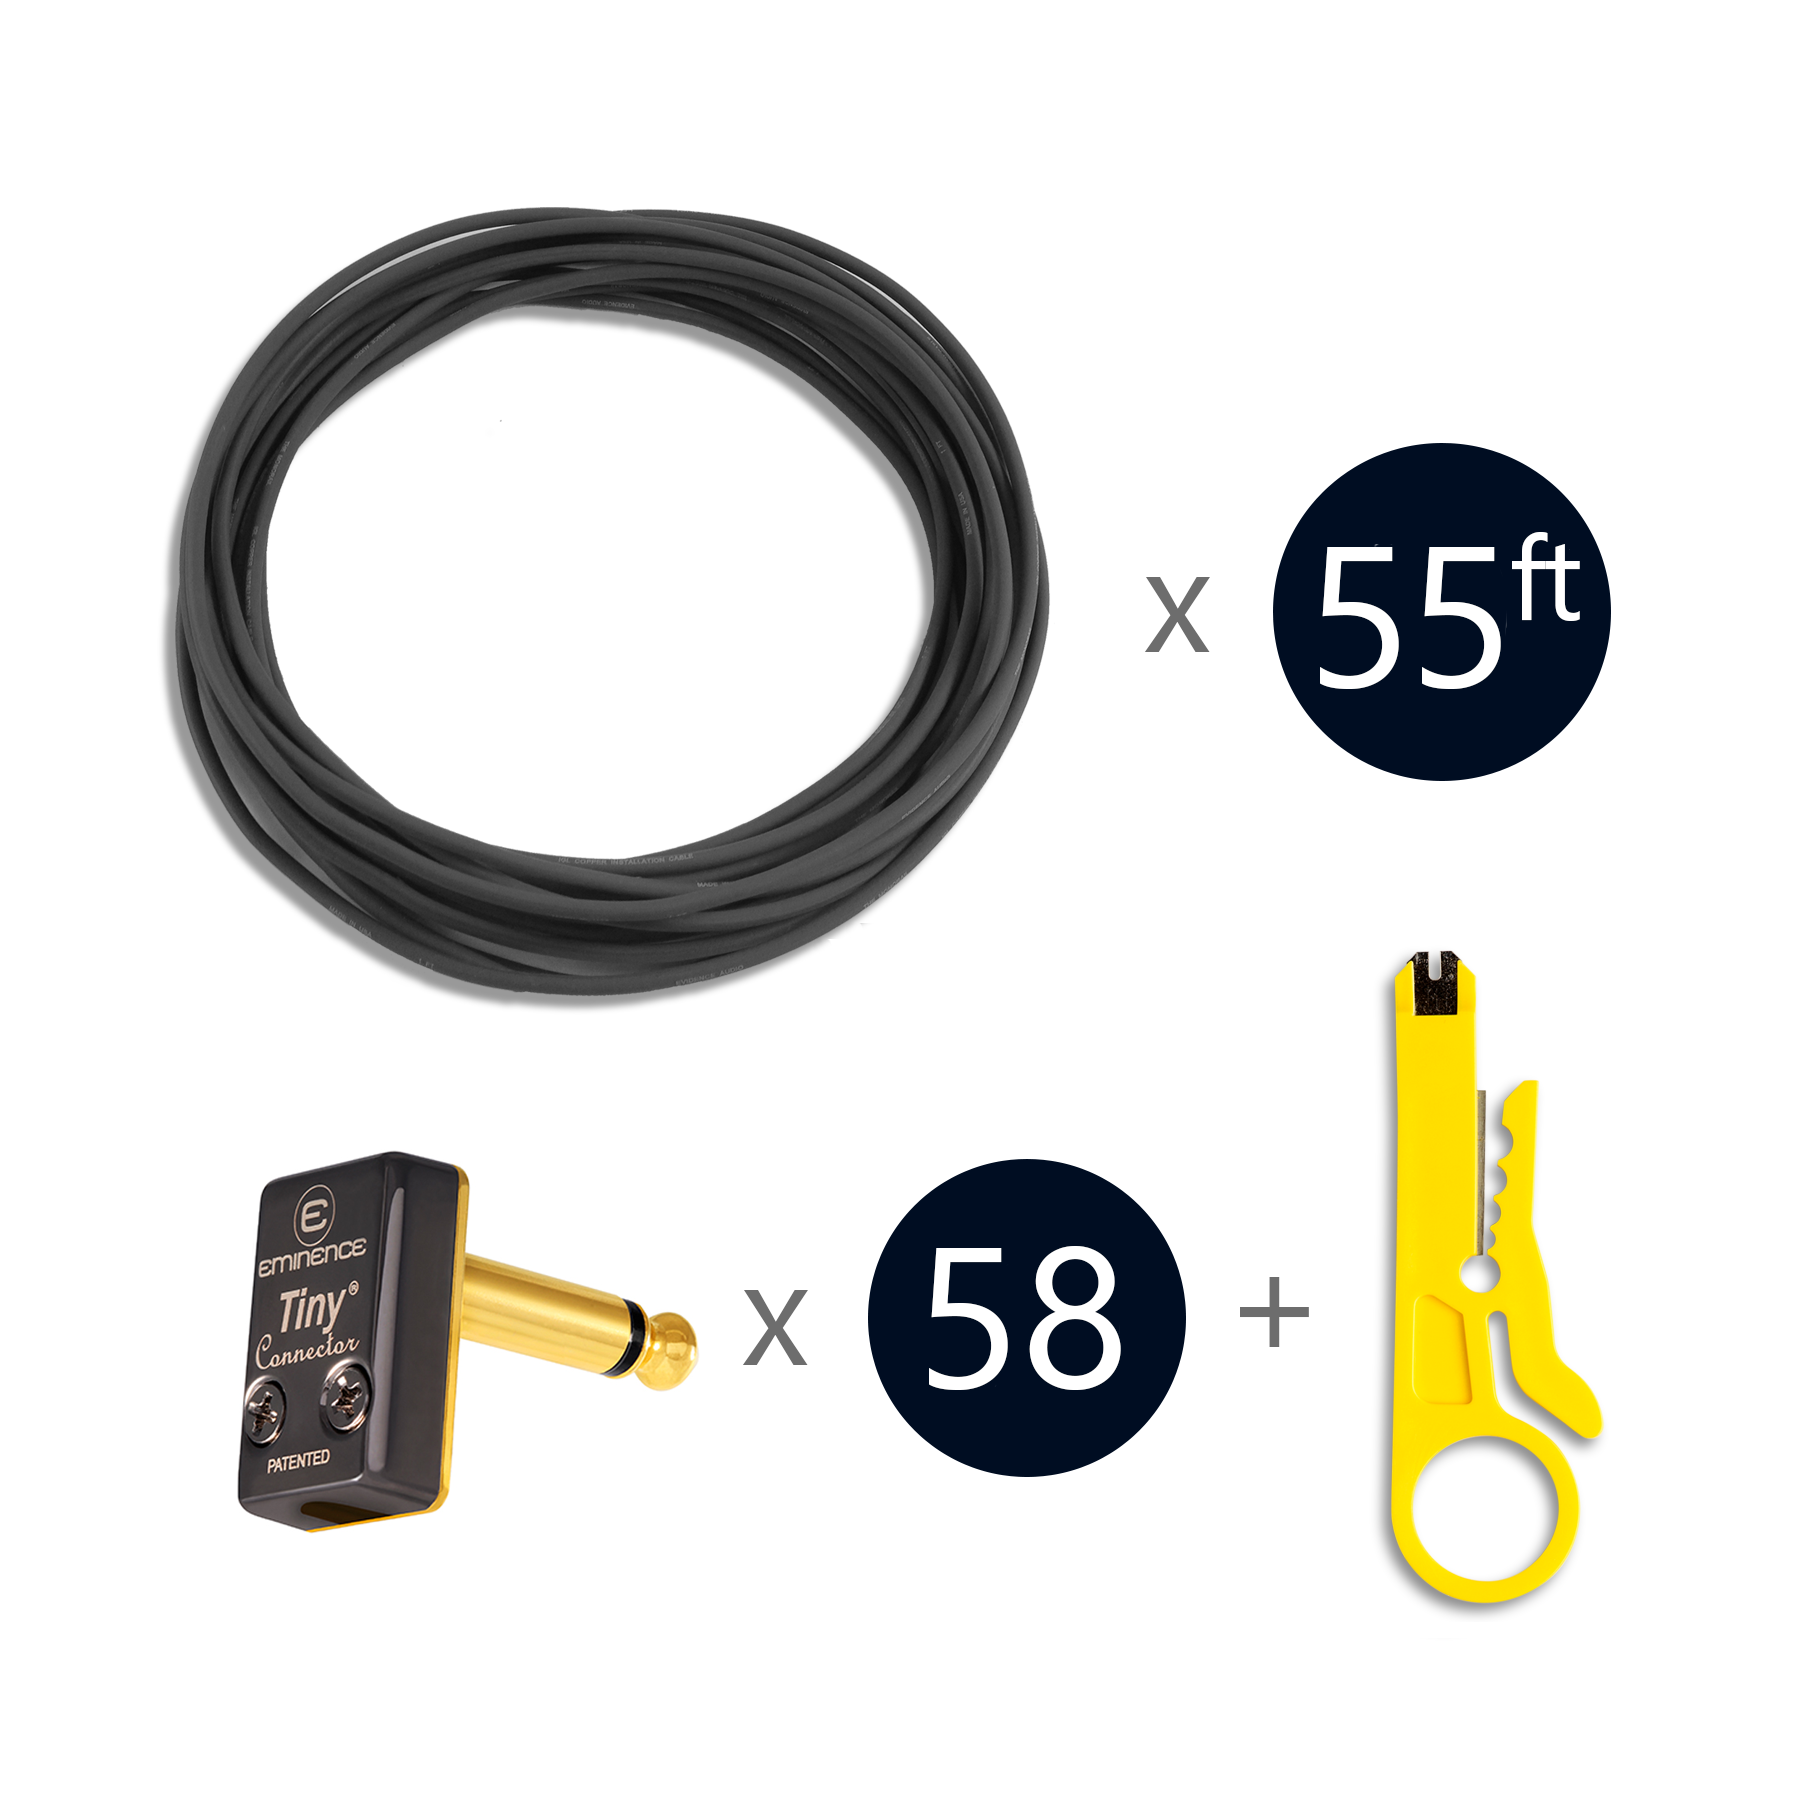 55 ft Evidence Audio Monorail cable + 58 x Eminence Tiny Connector Plug + cable cutter tool